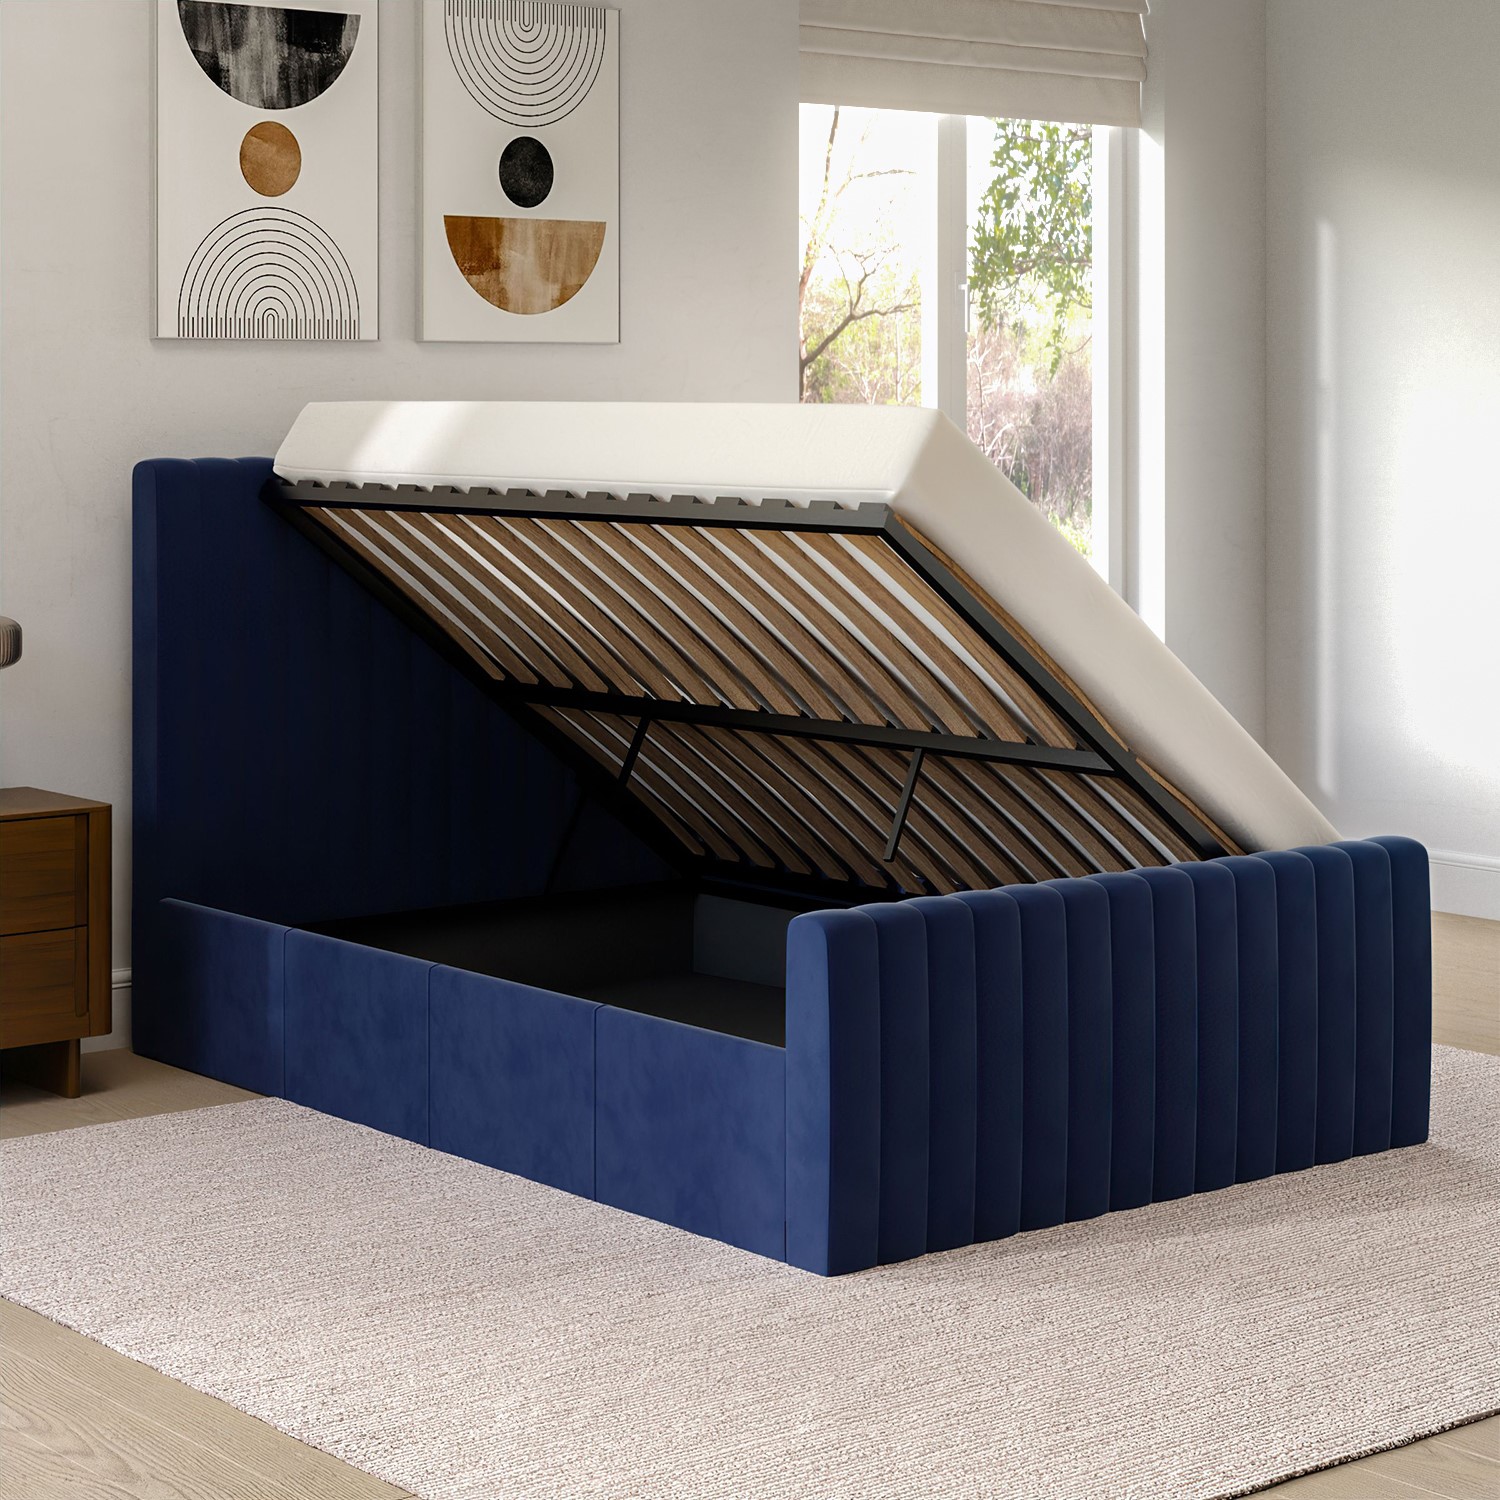 Read more about Side opening navy blue velvet double ottoman bed khloe